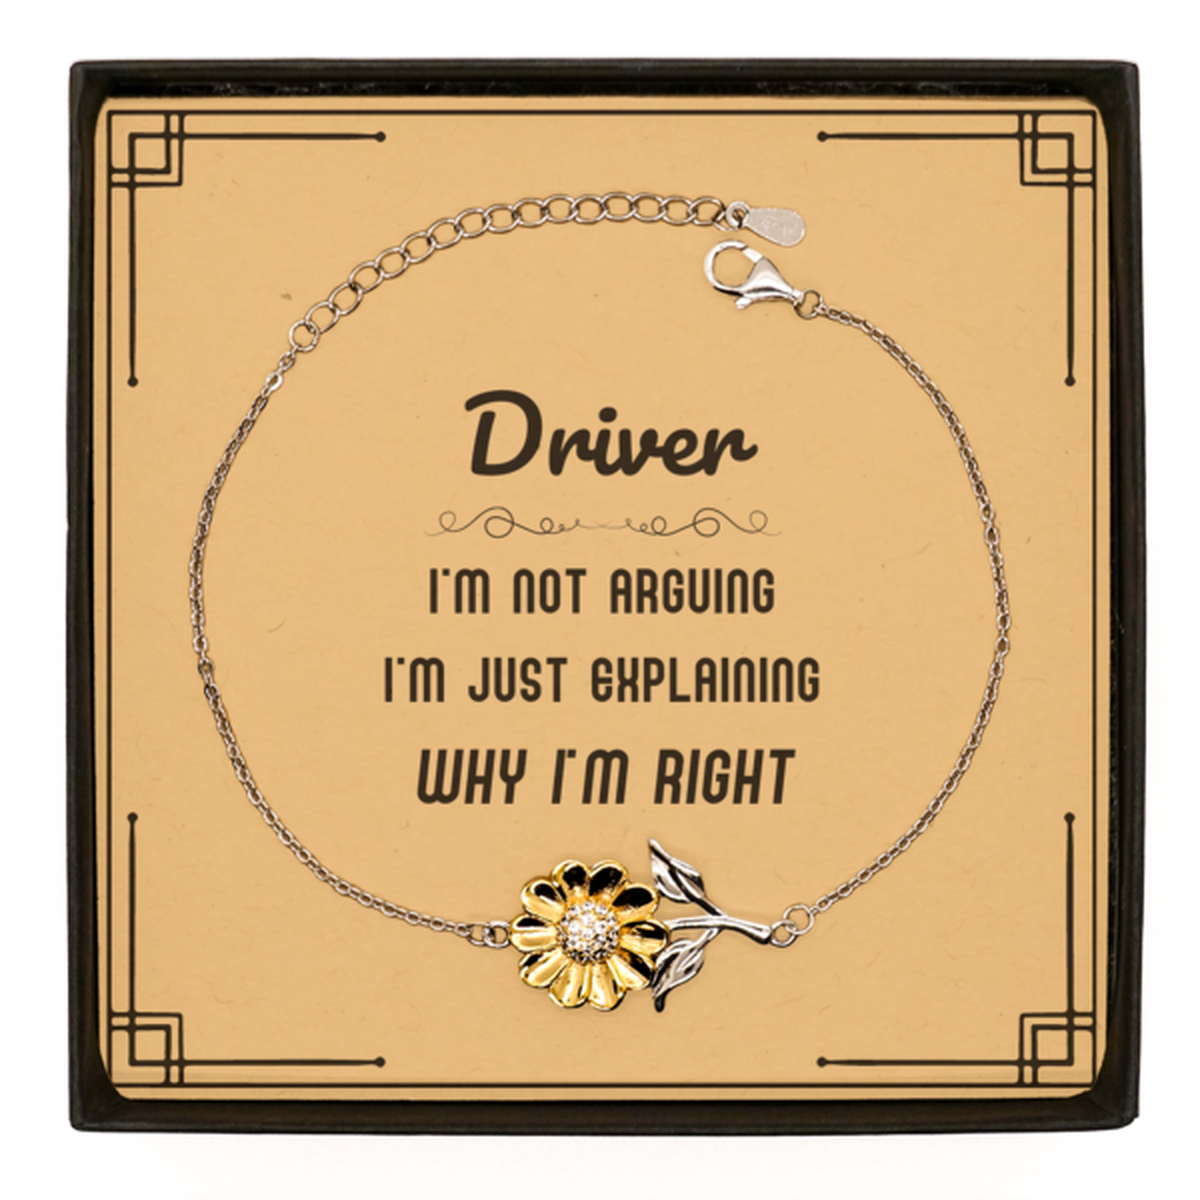 Driver I'm not Arguing. I'm Just Explaining Why I'm RIGHT Sunflower Bracelet, Funny Saying Quote Driver Gifts For Driver Message Card Graduation Birthday Christmas Gifts for Men Women Coworker